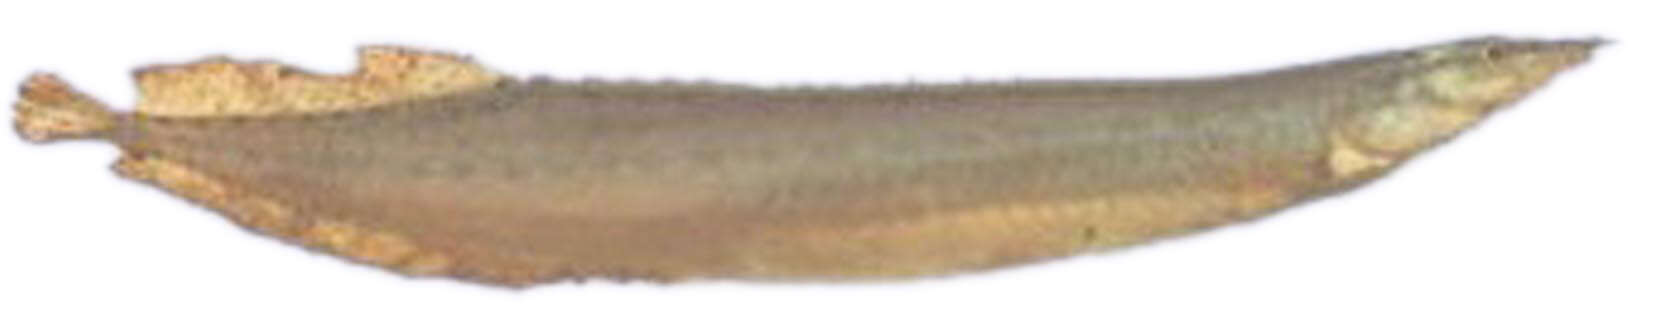 Image of Spiny Eel